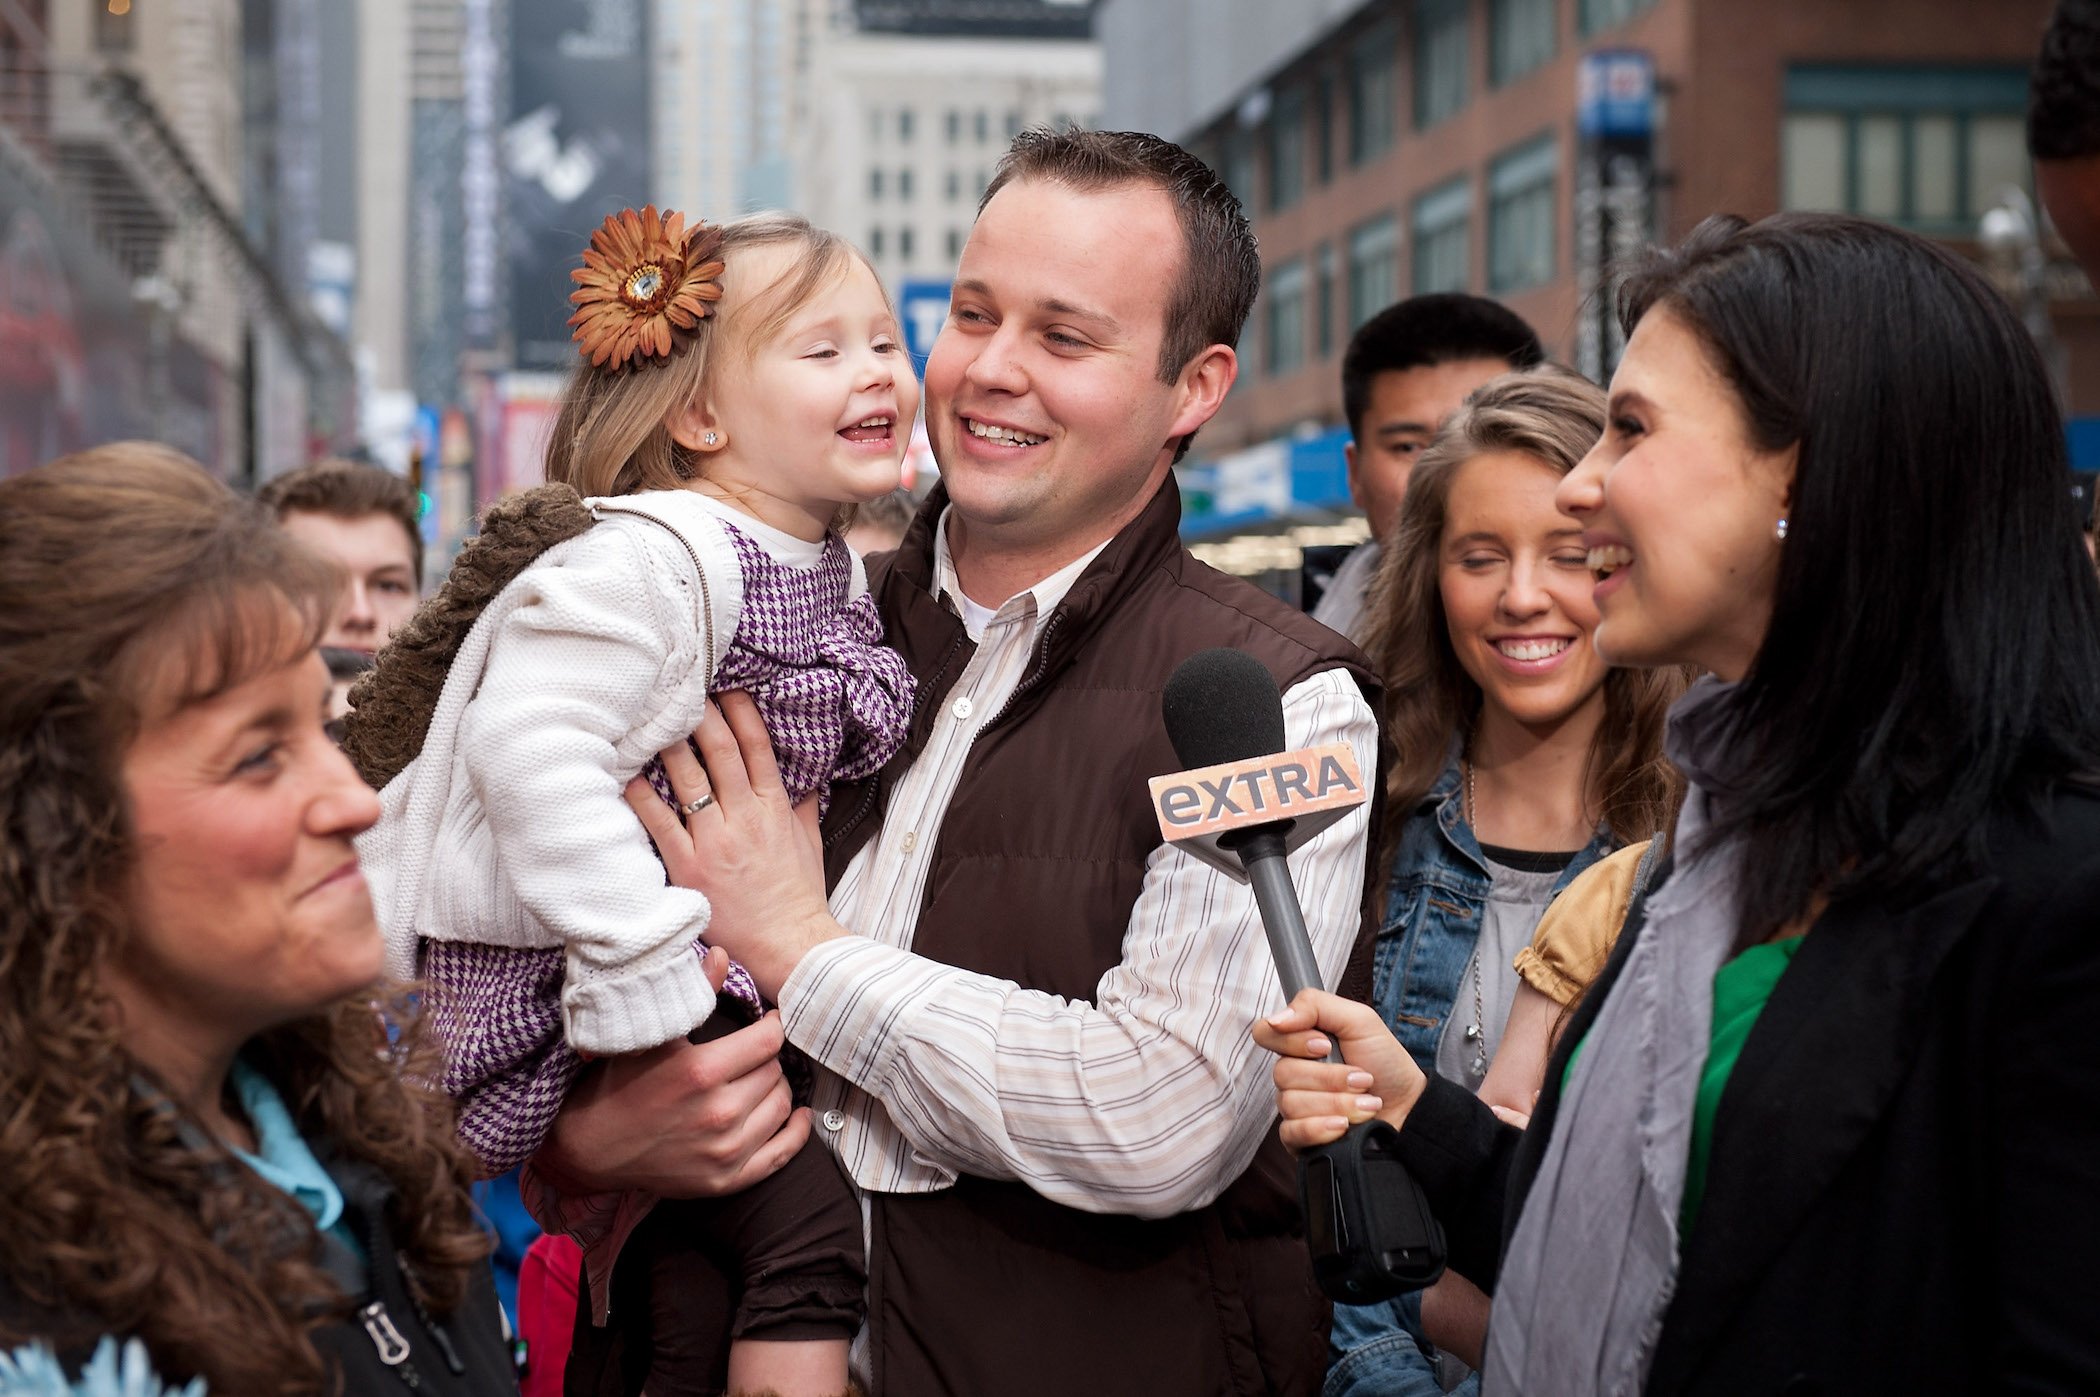 Josh Duggar and one of Josh and Anna's kids during their visit with 'Extra' in Times Square. J